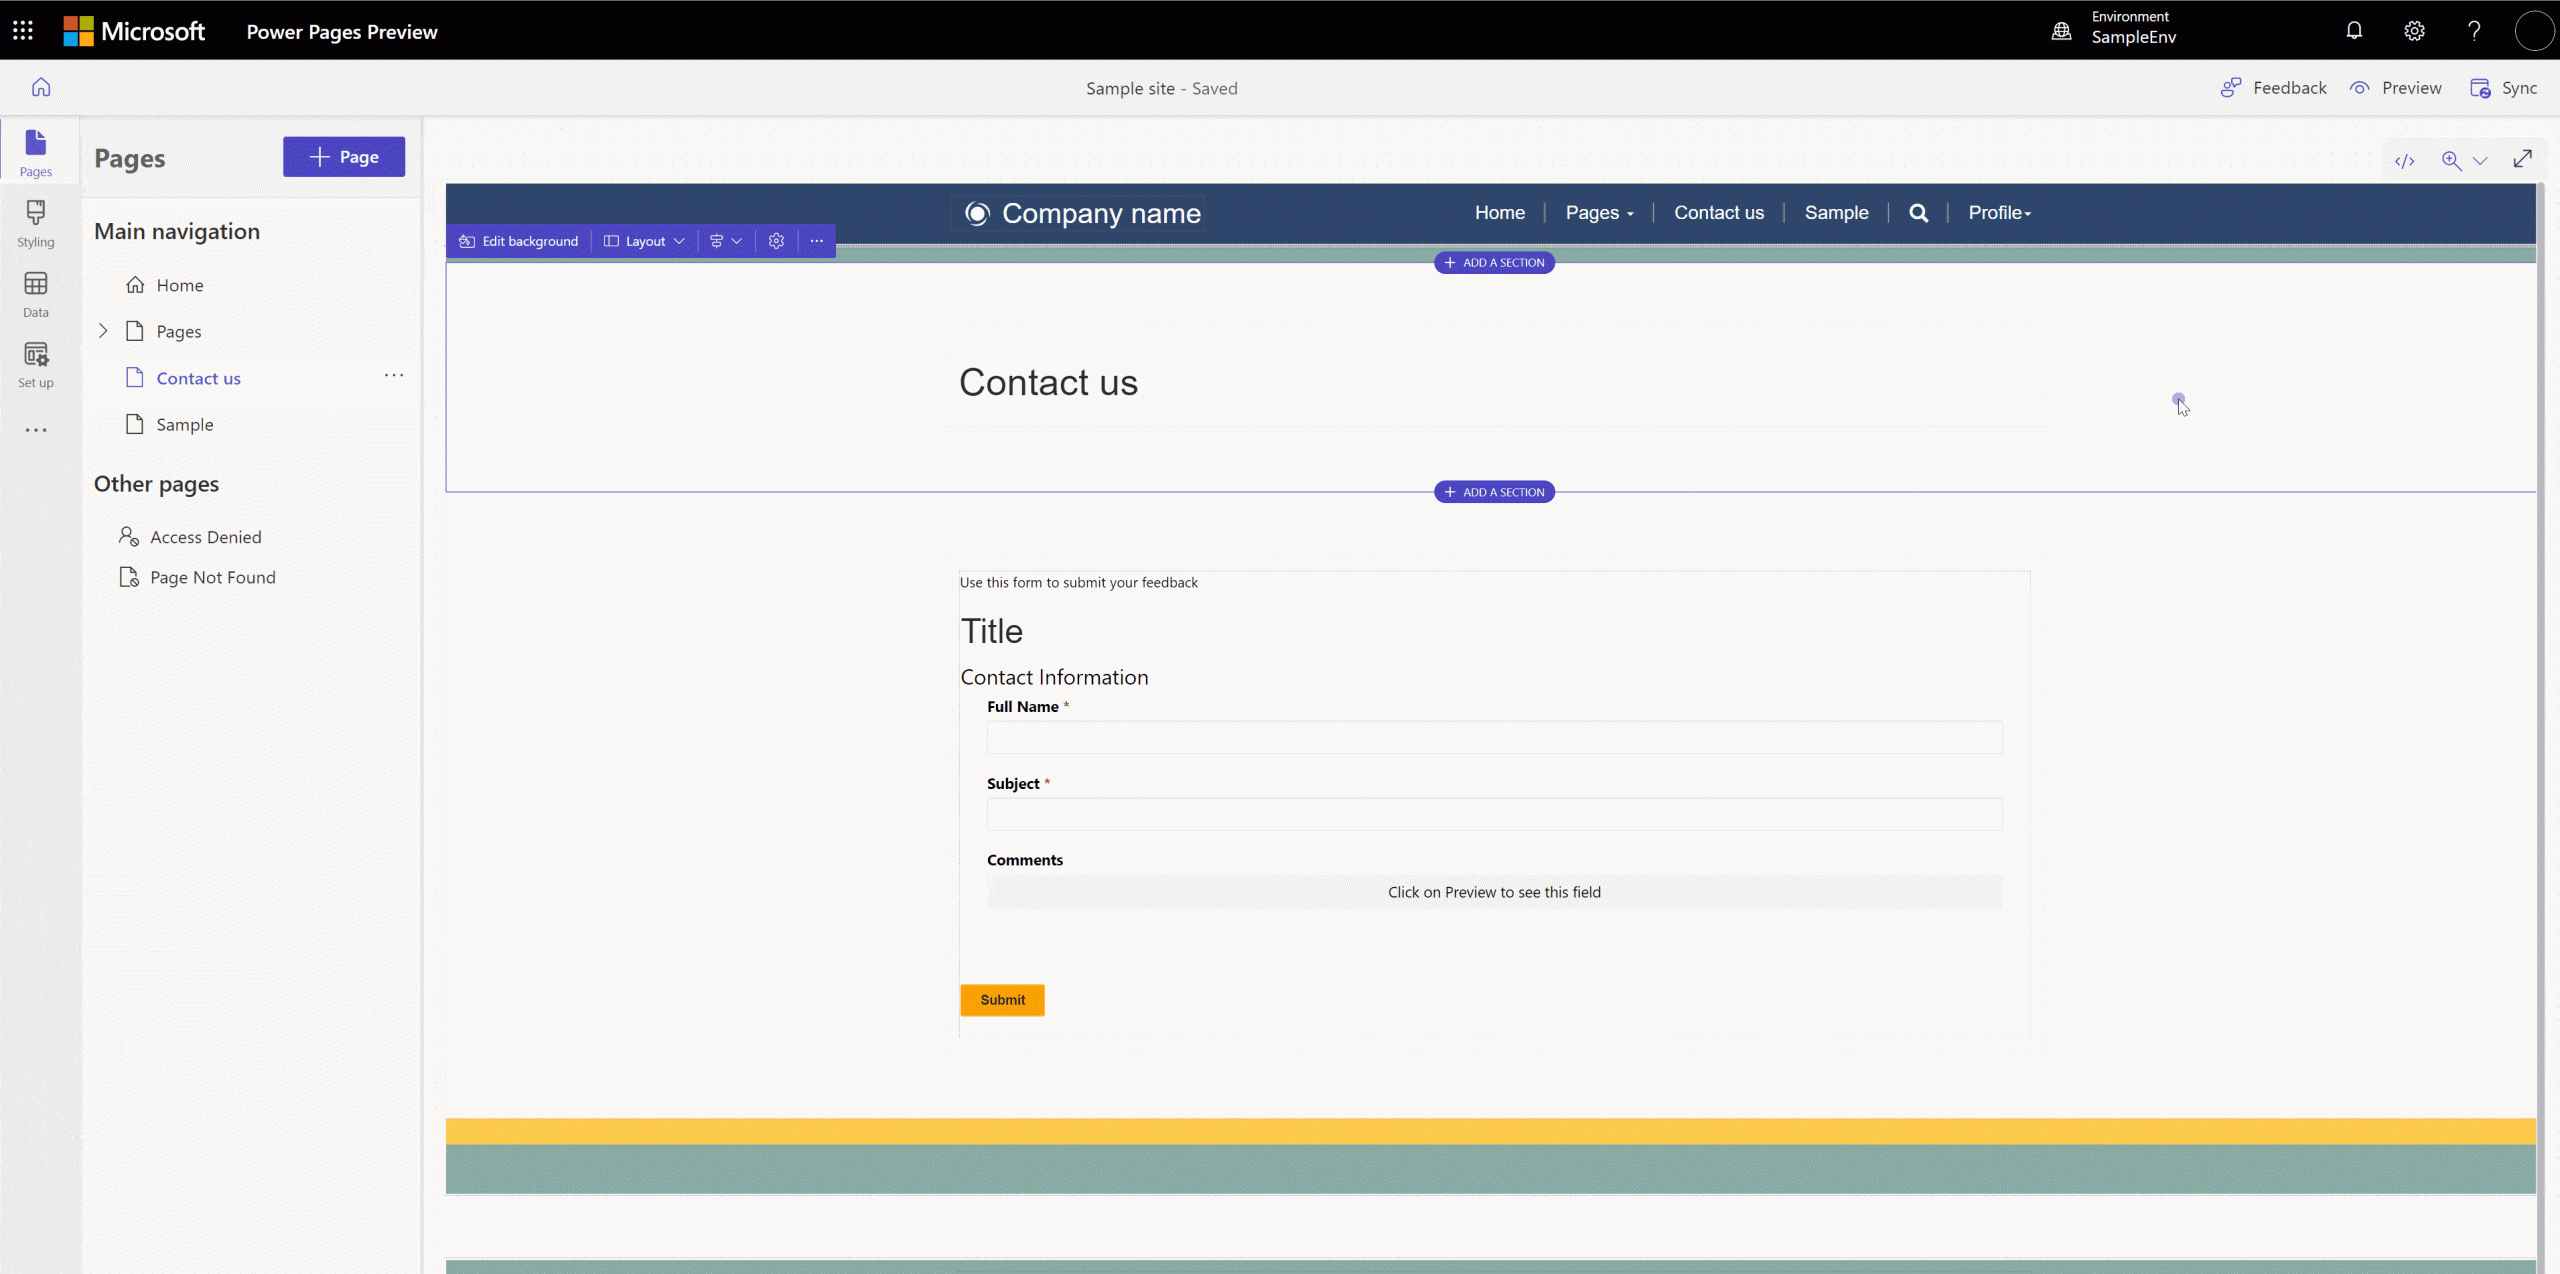 Editing a form's description and title. Making a word bold in the description and updating the title from Title to Fill in your details